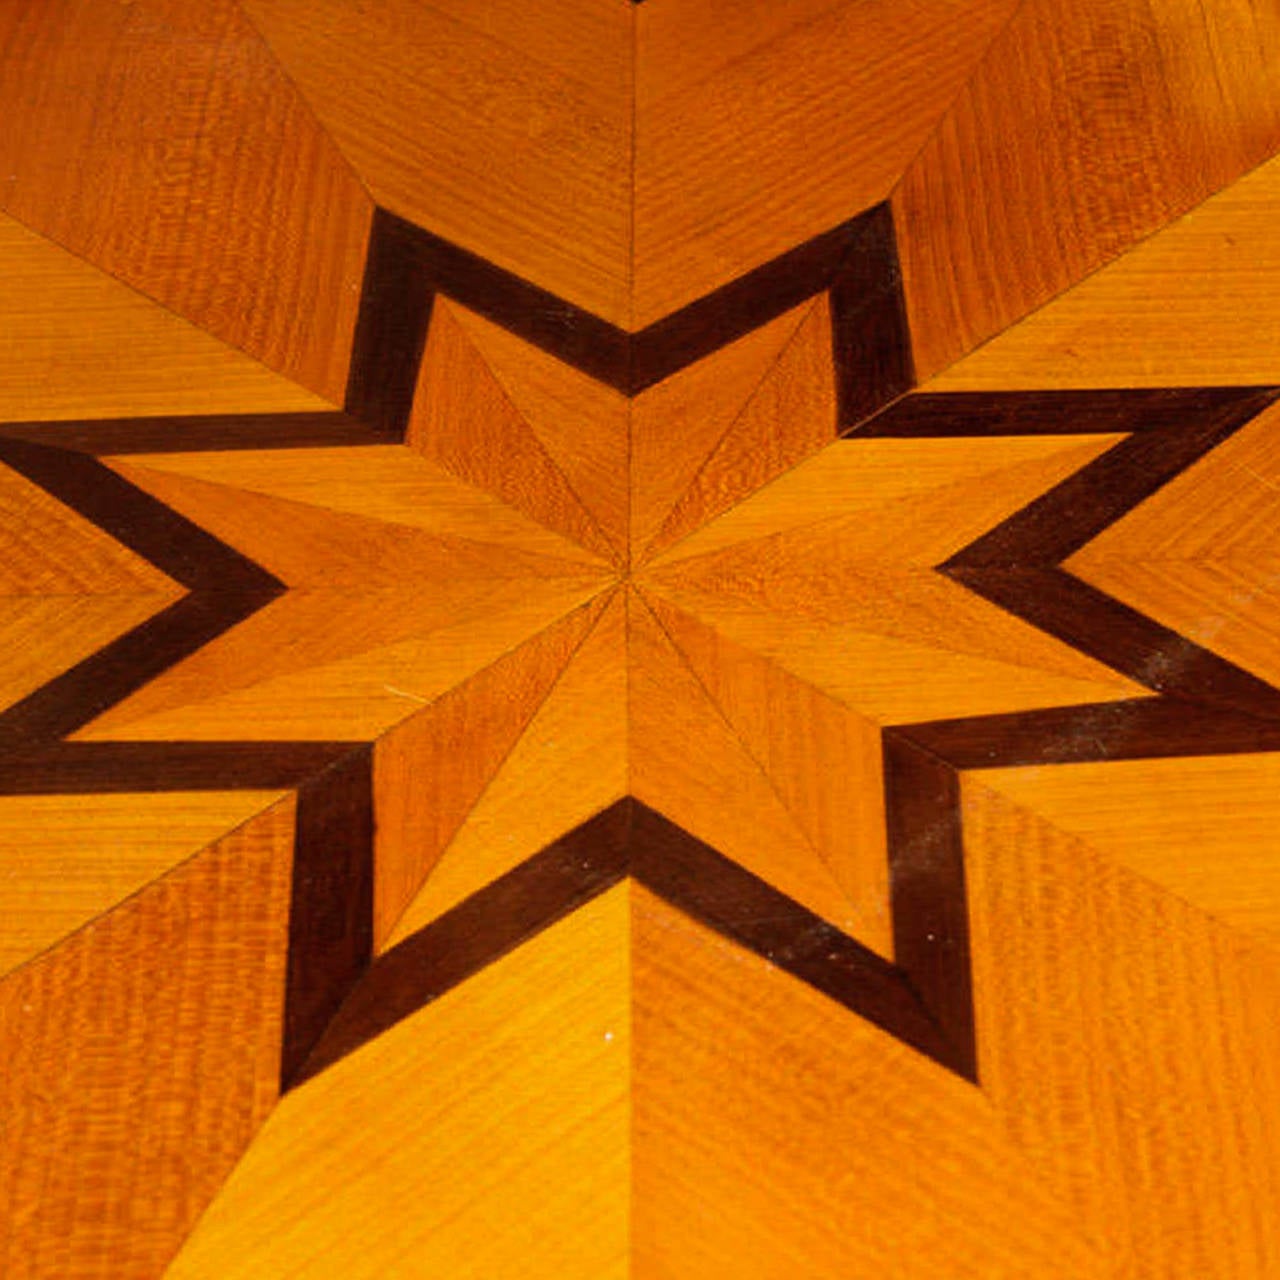 Rosewood Center Table with Inlaid Starburst Pattern by Dominique, French, 1930s